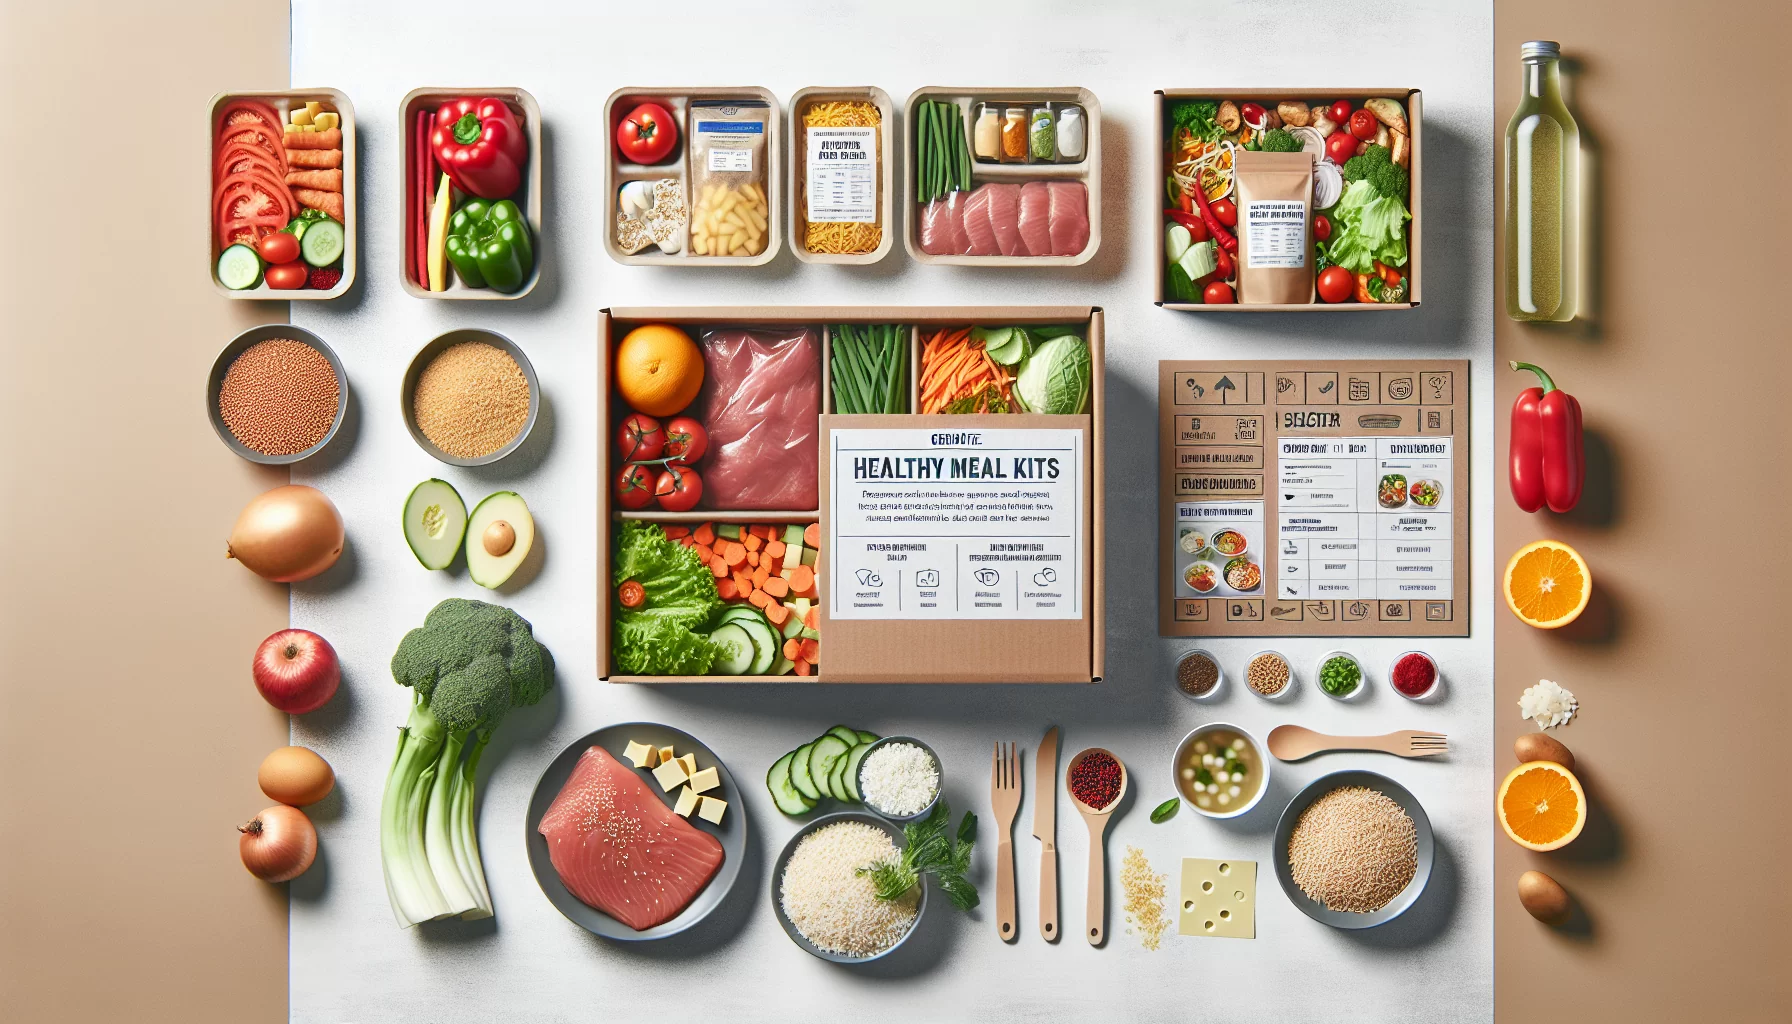 Unpacking the revolution of healthy meal kits - exploring top picks and benefits